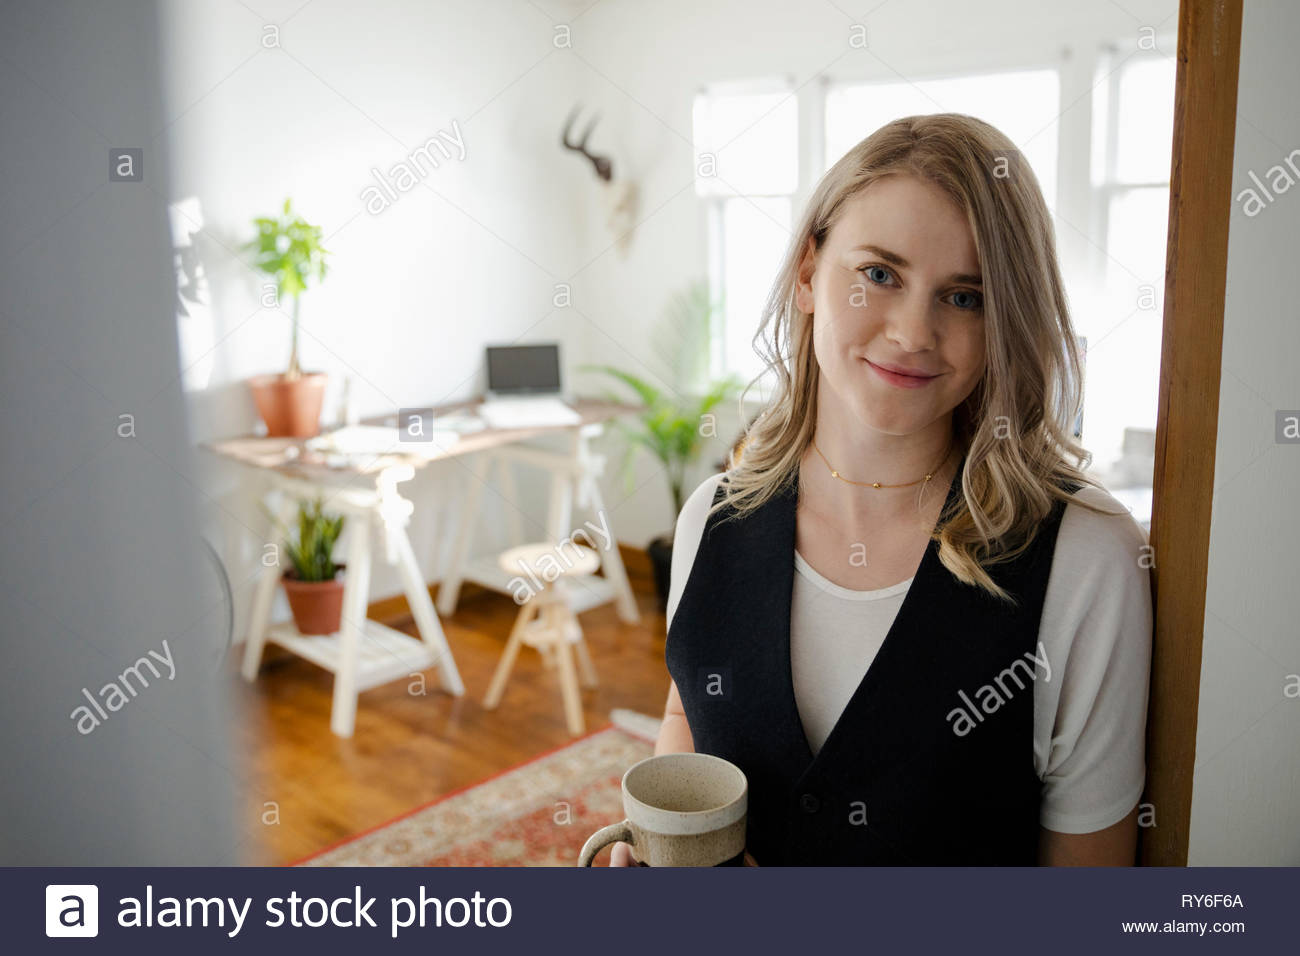 Portrait confident woman drinking coffee in home office doorway Stock Photo